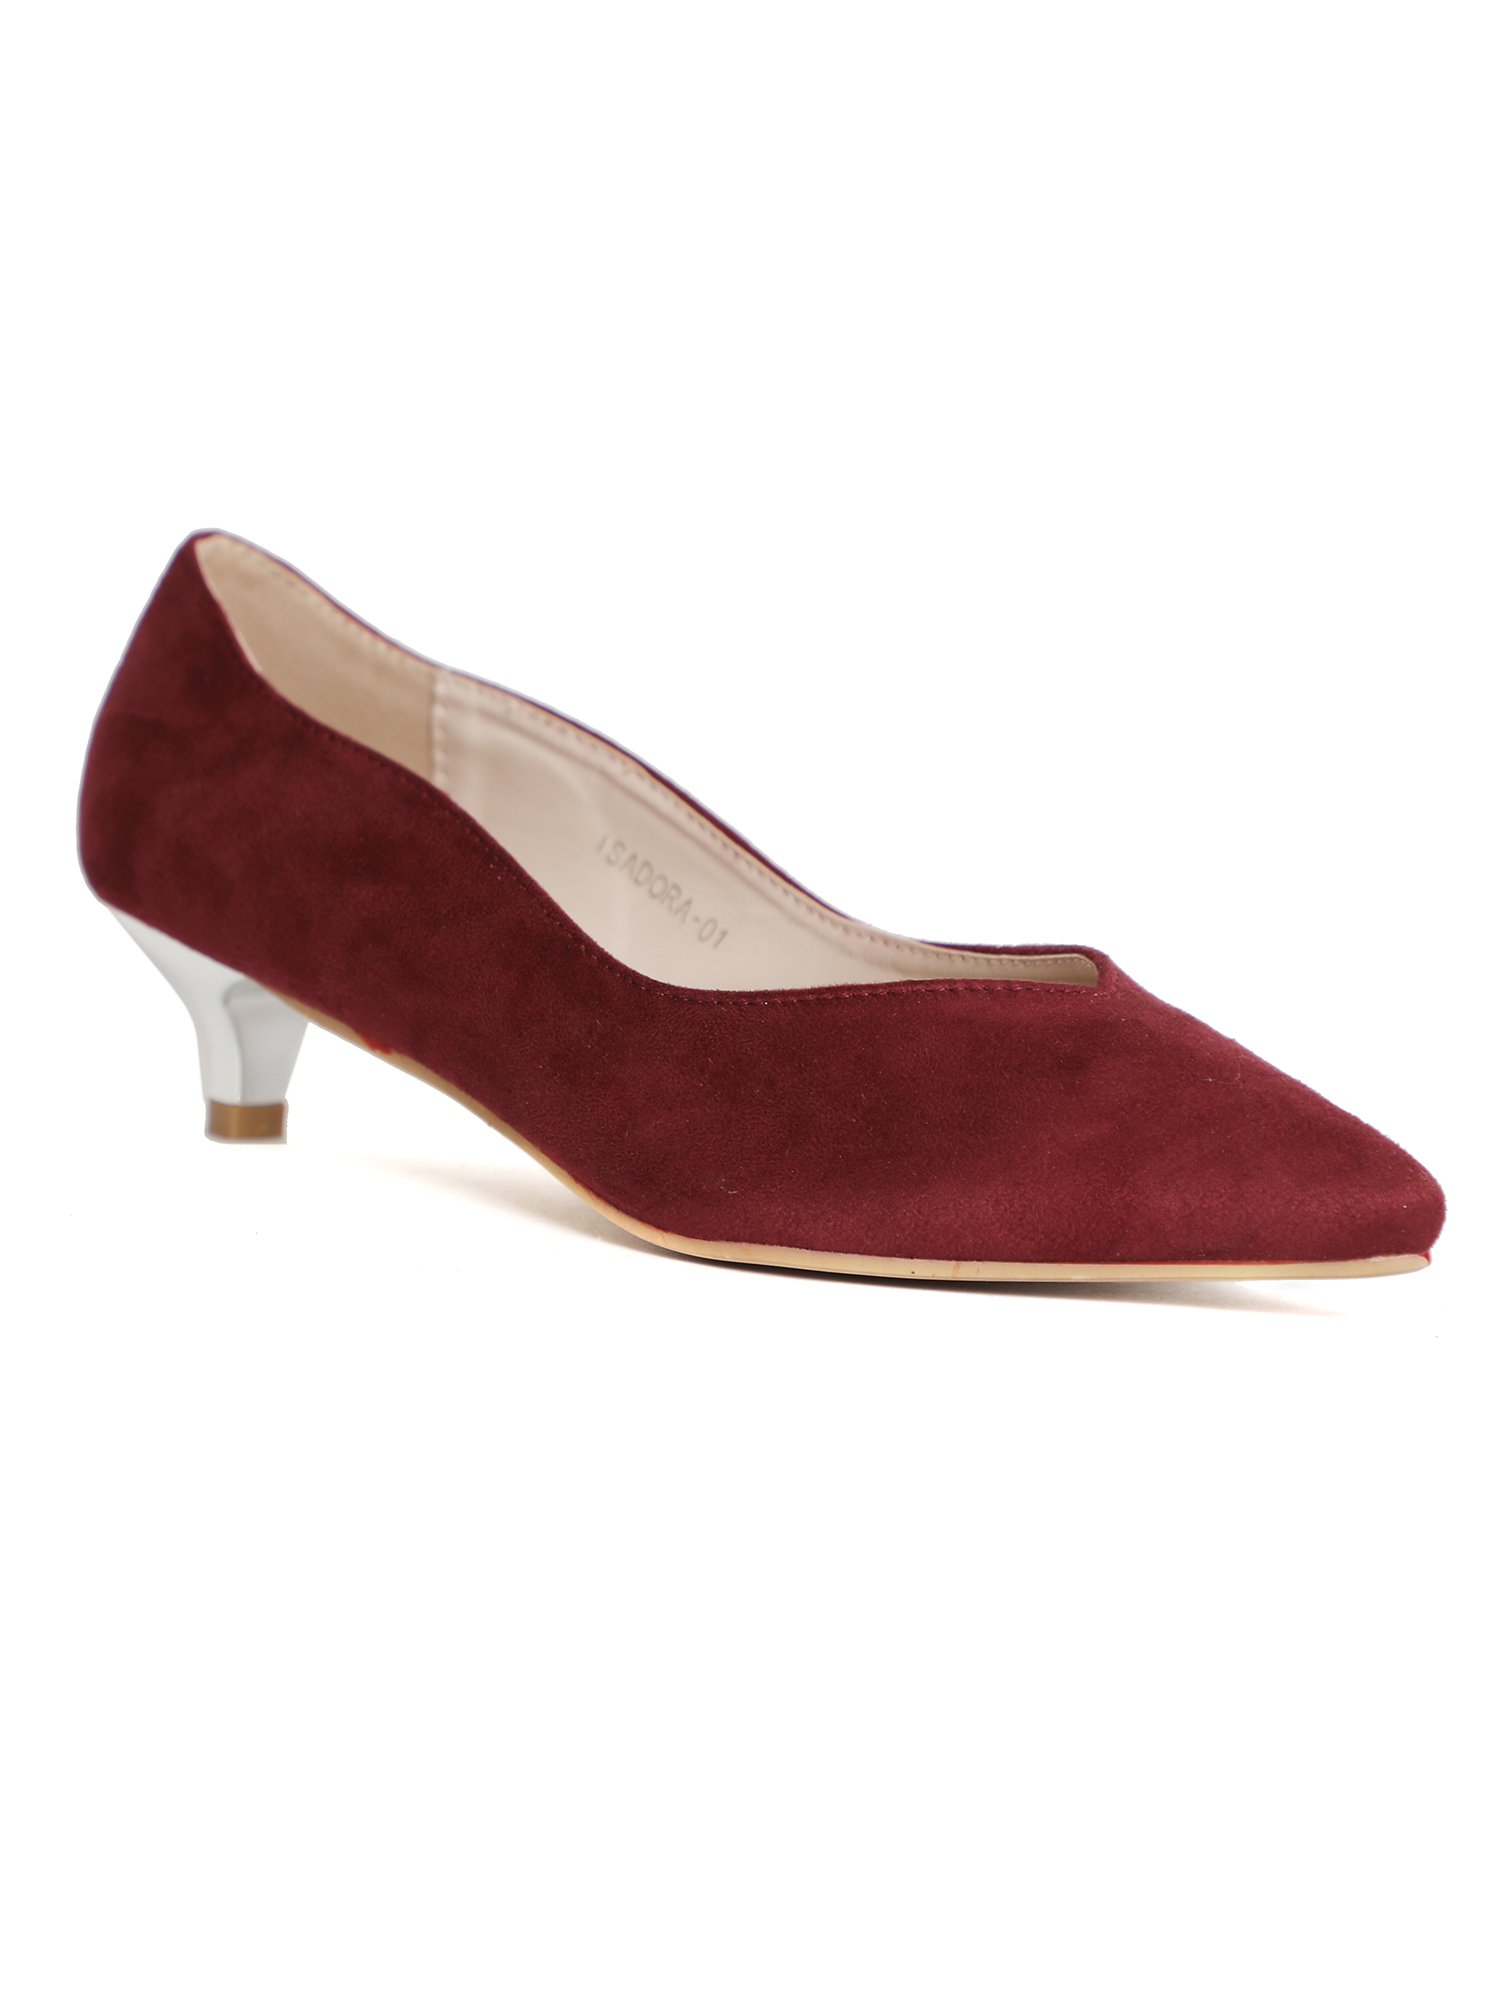 Chrome-accented Pointed Toe Women's Kitten Heels in Burgundy - image 1 of 3